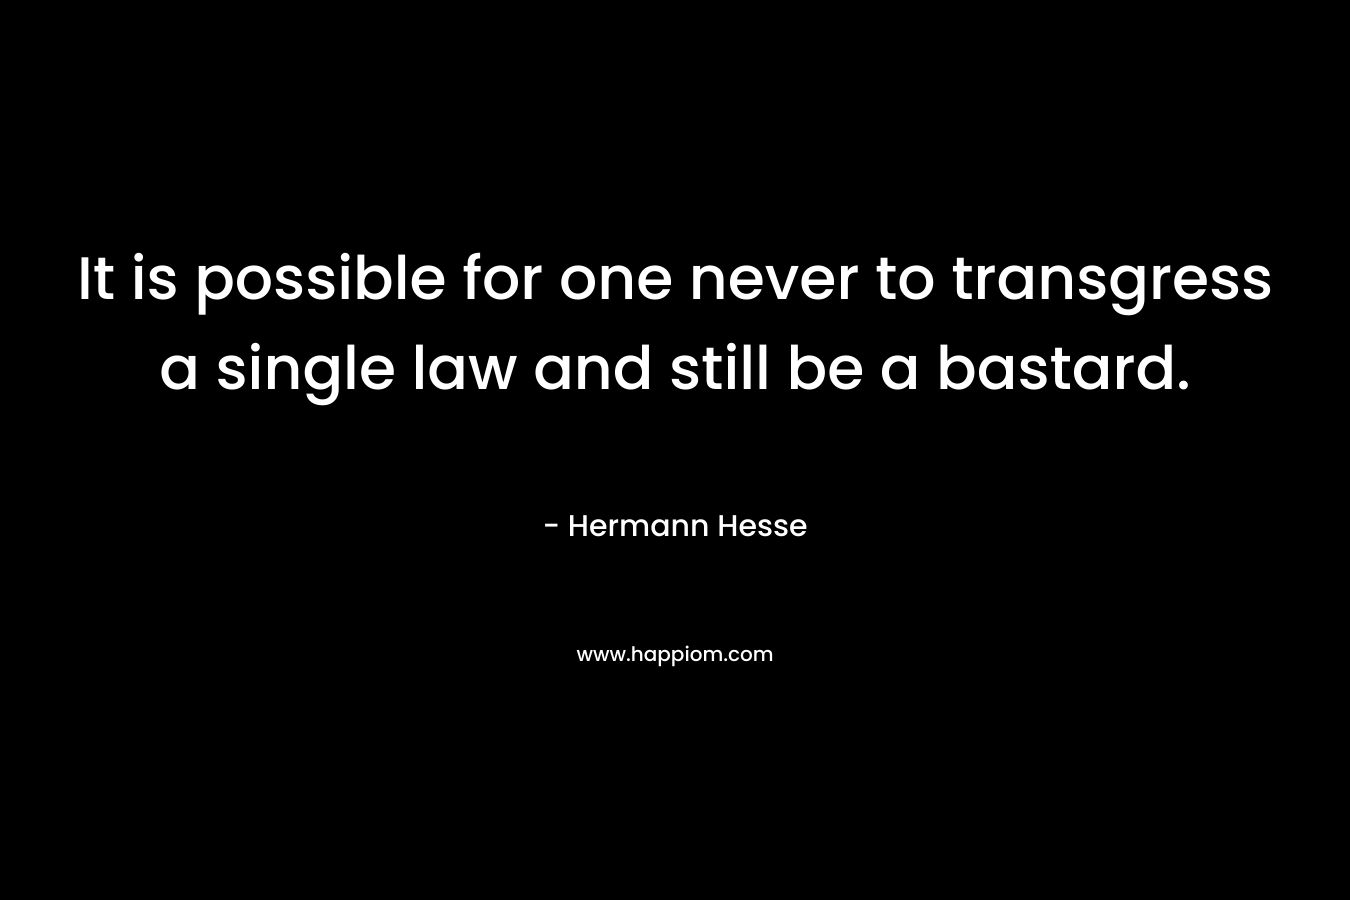 It is possible for one never to transgress a single law and still be a bastard. – Hermann Hesse